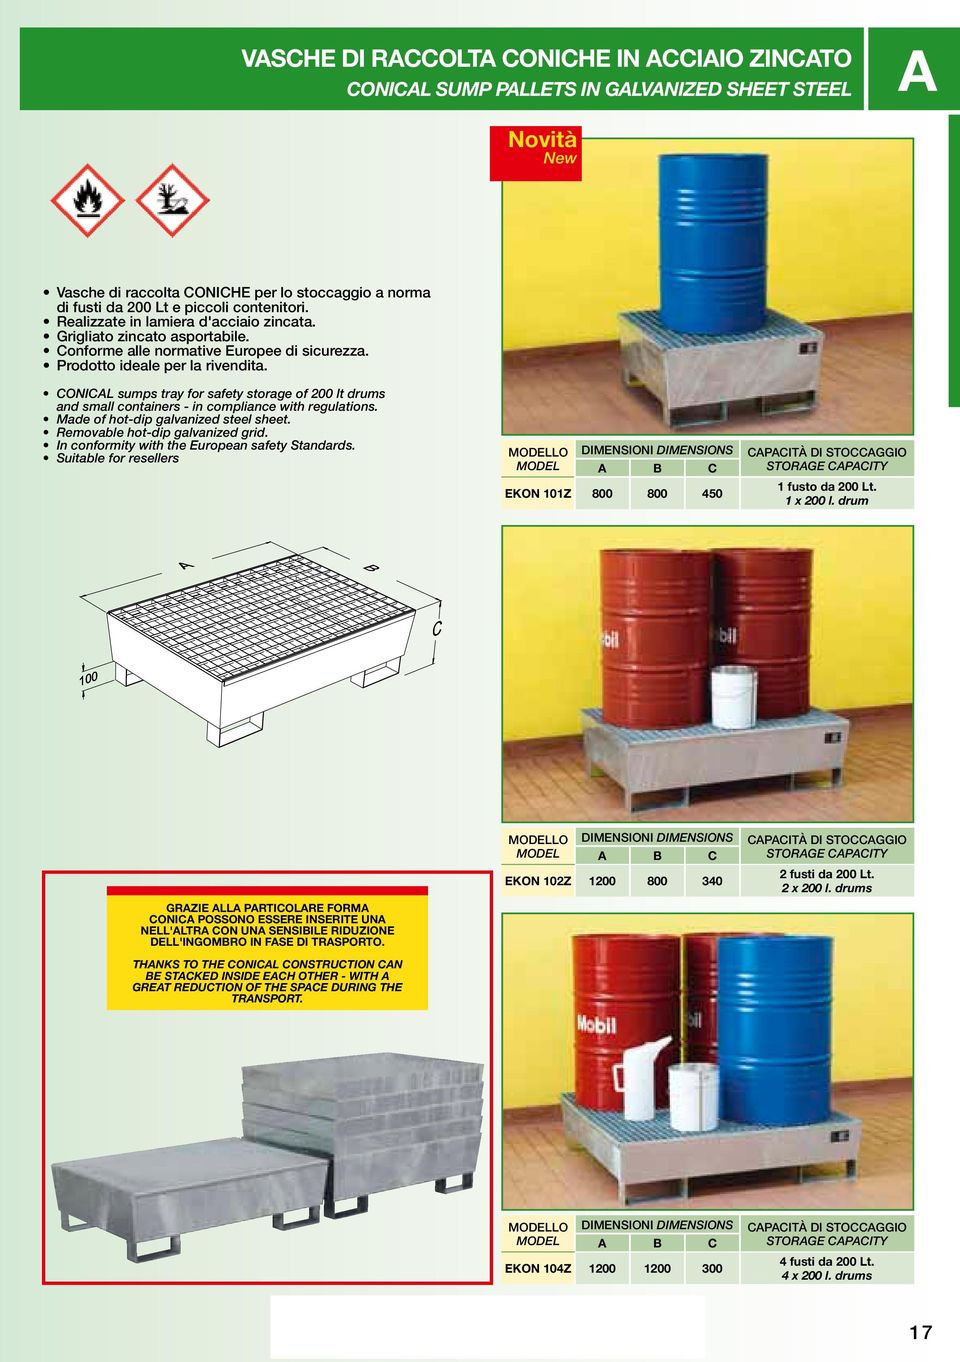 CONICAL sumps tray for safety storage of 200 lt drums and small containers - in compliance with regulations. Made of hot-dip galvanized steel sheet. Removable hot-dip galvanized grid.